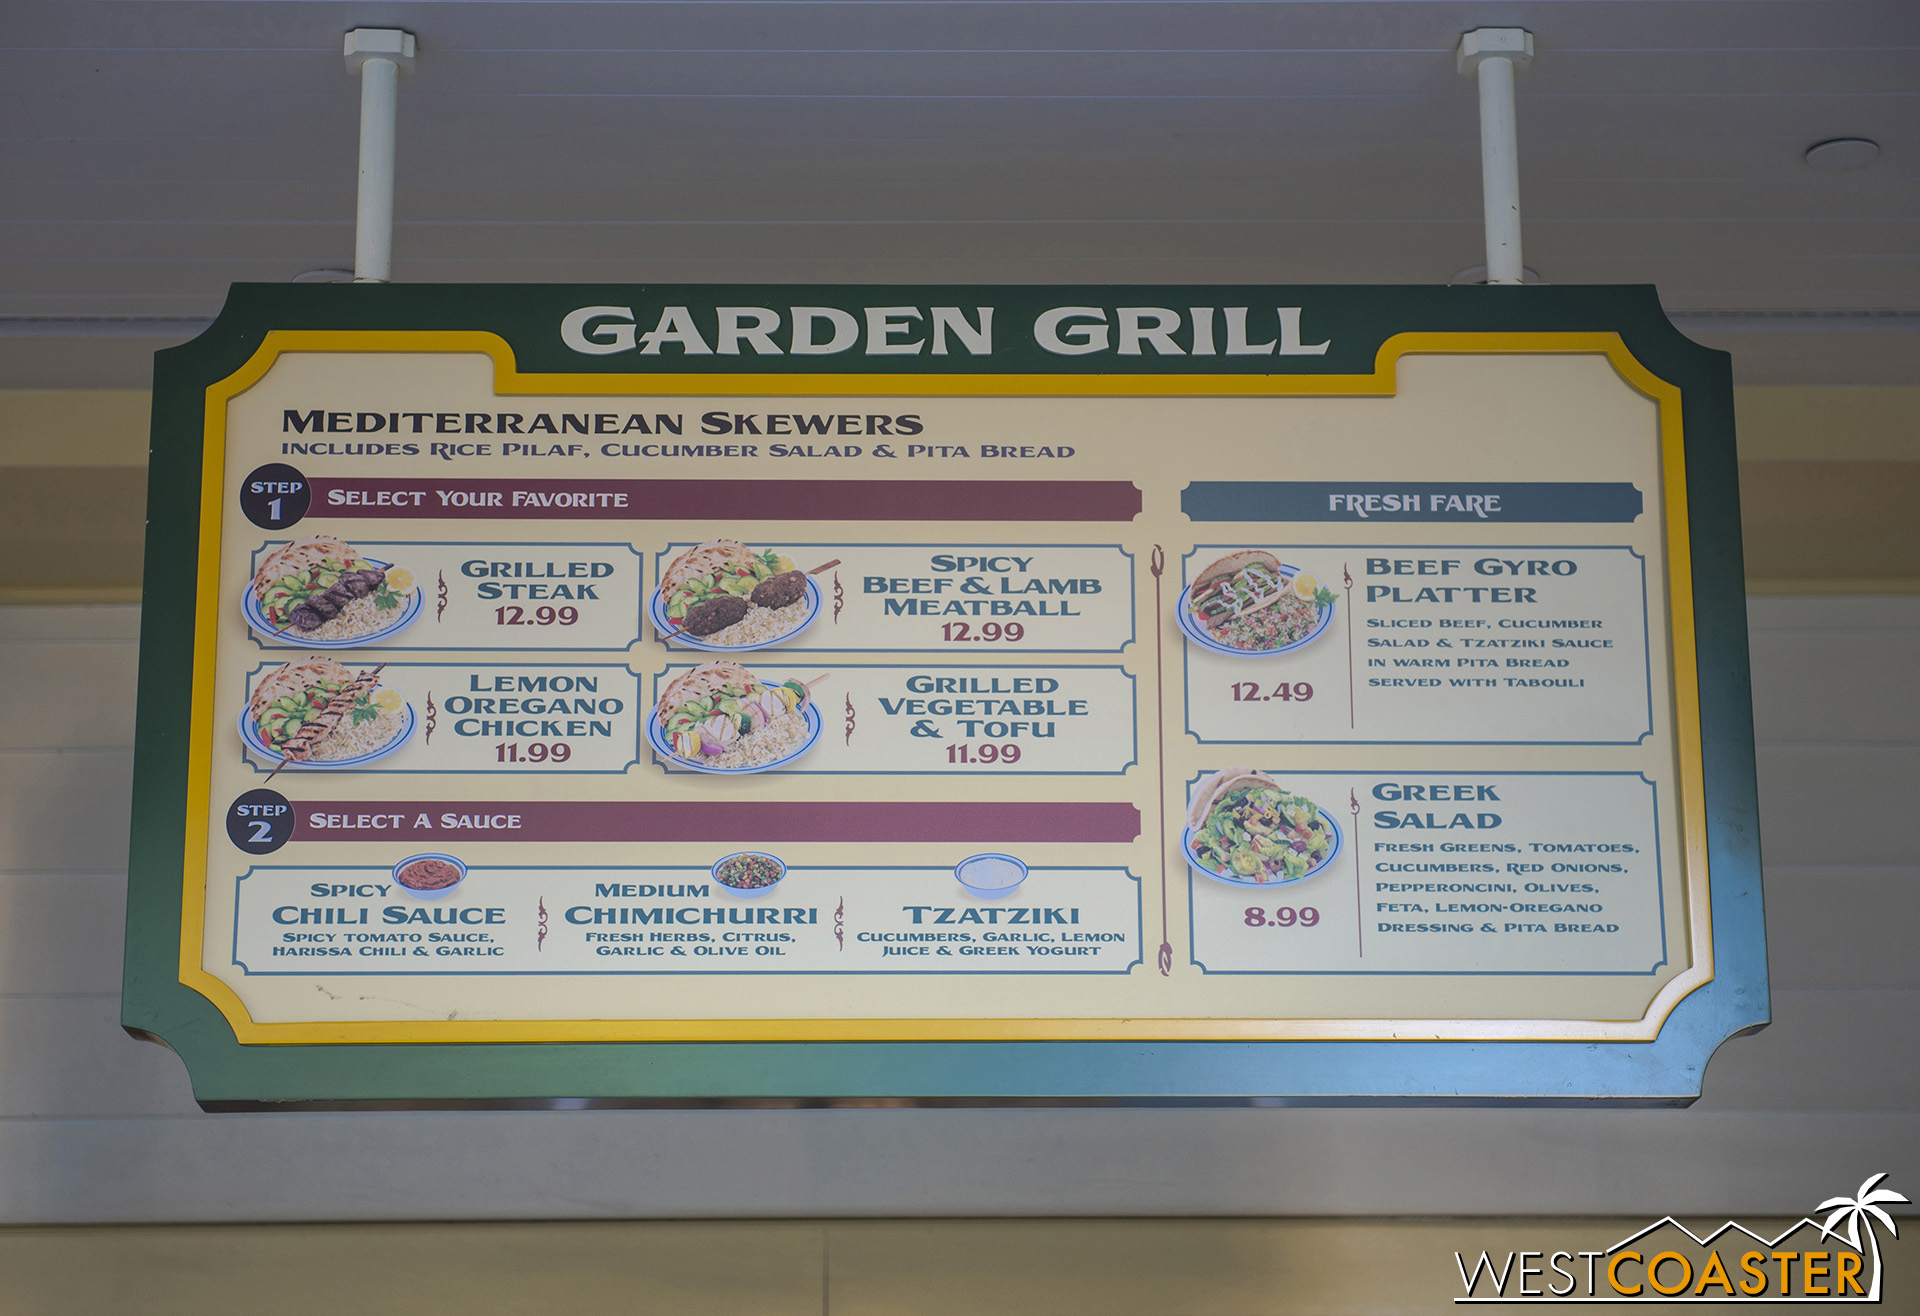  Feast your eyes on a rare sight… the original and normal Garden Grill menu!  I was shocked to see this last week, but it turned out to be a tease, because Garden Grill wasn’t even open on Friday, and it stayed closed this past week.  A cast member t